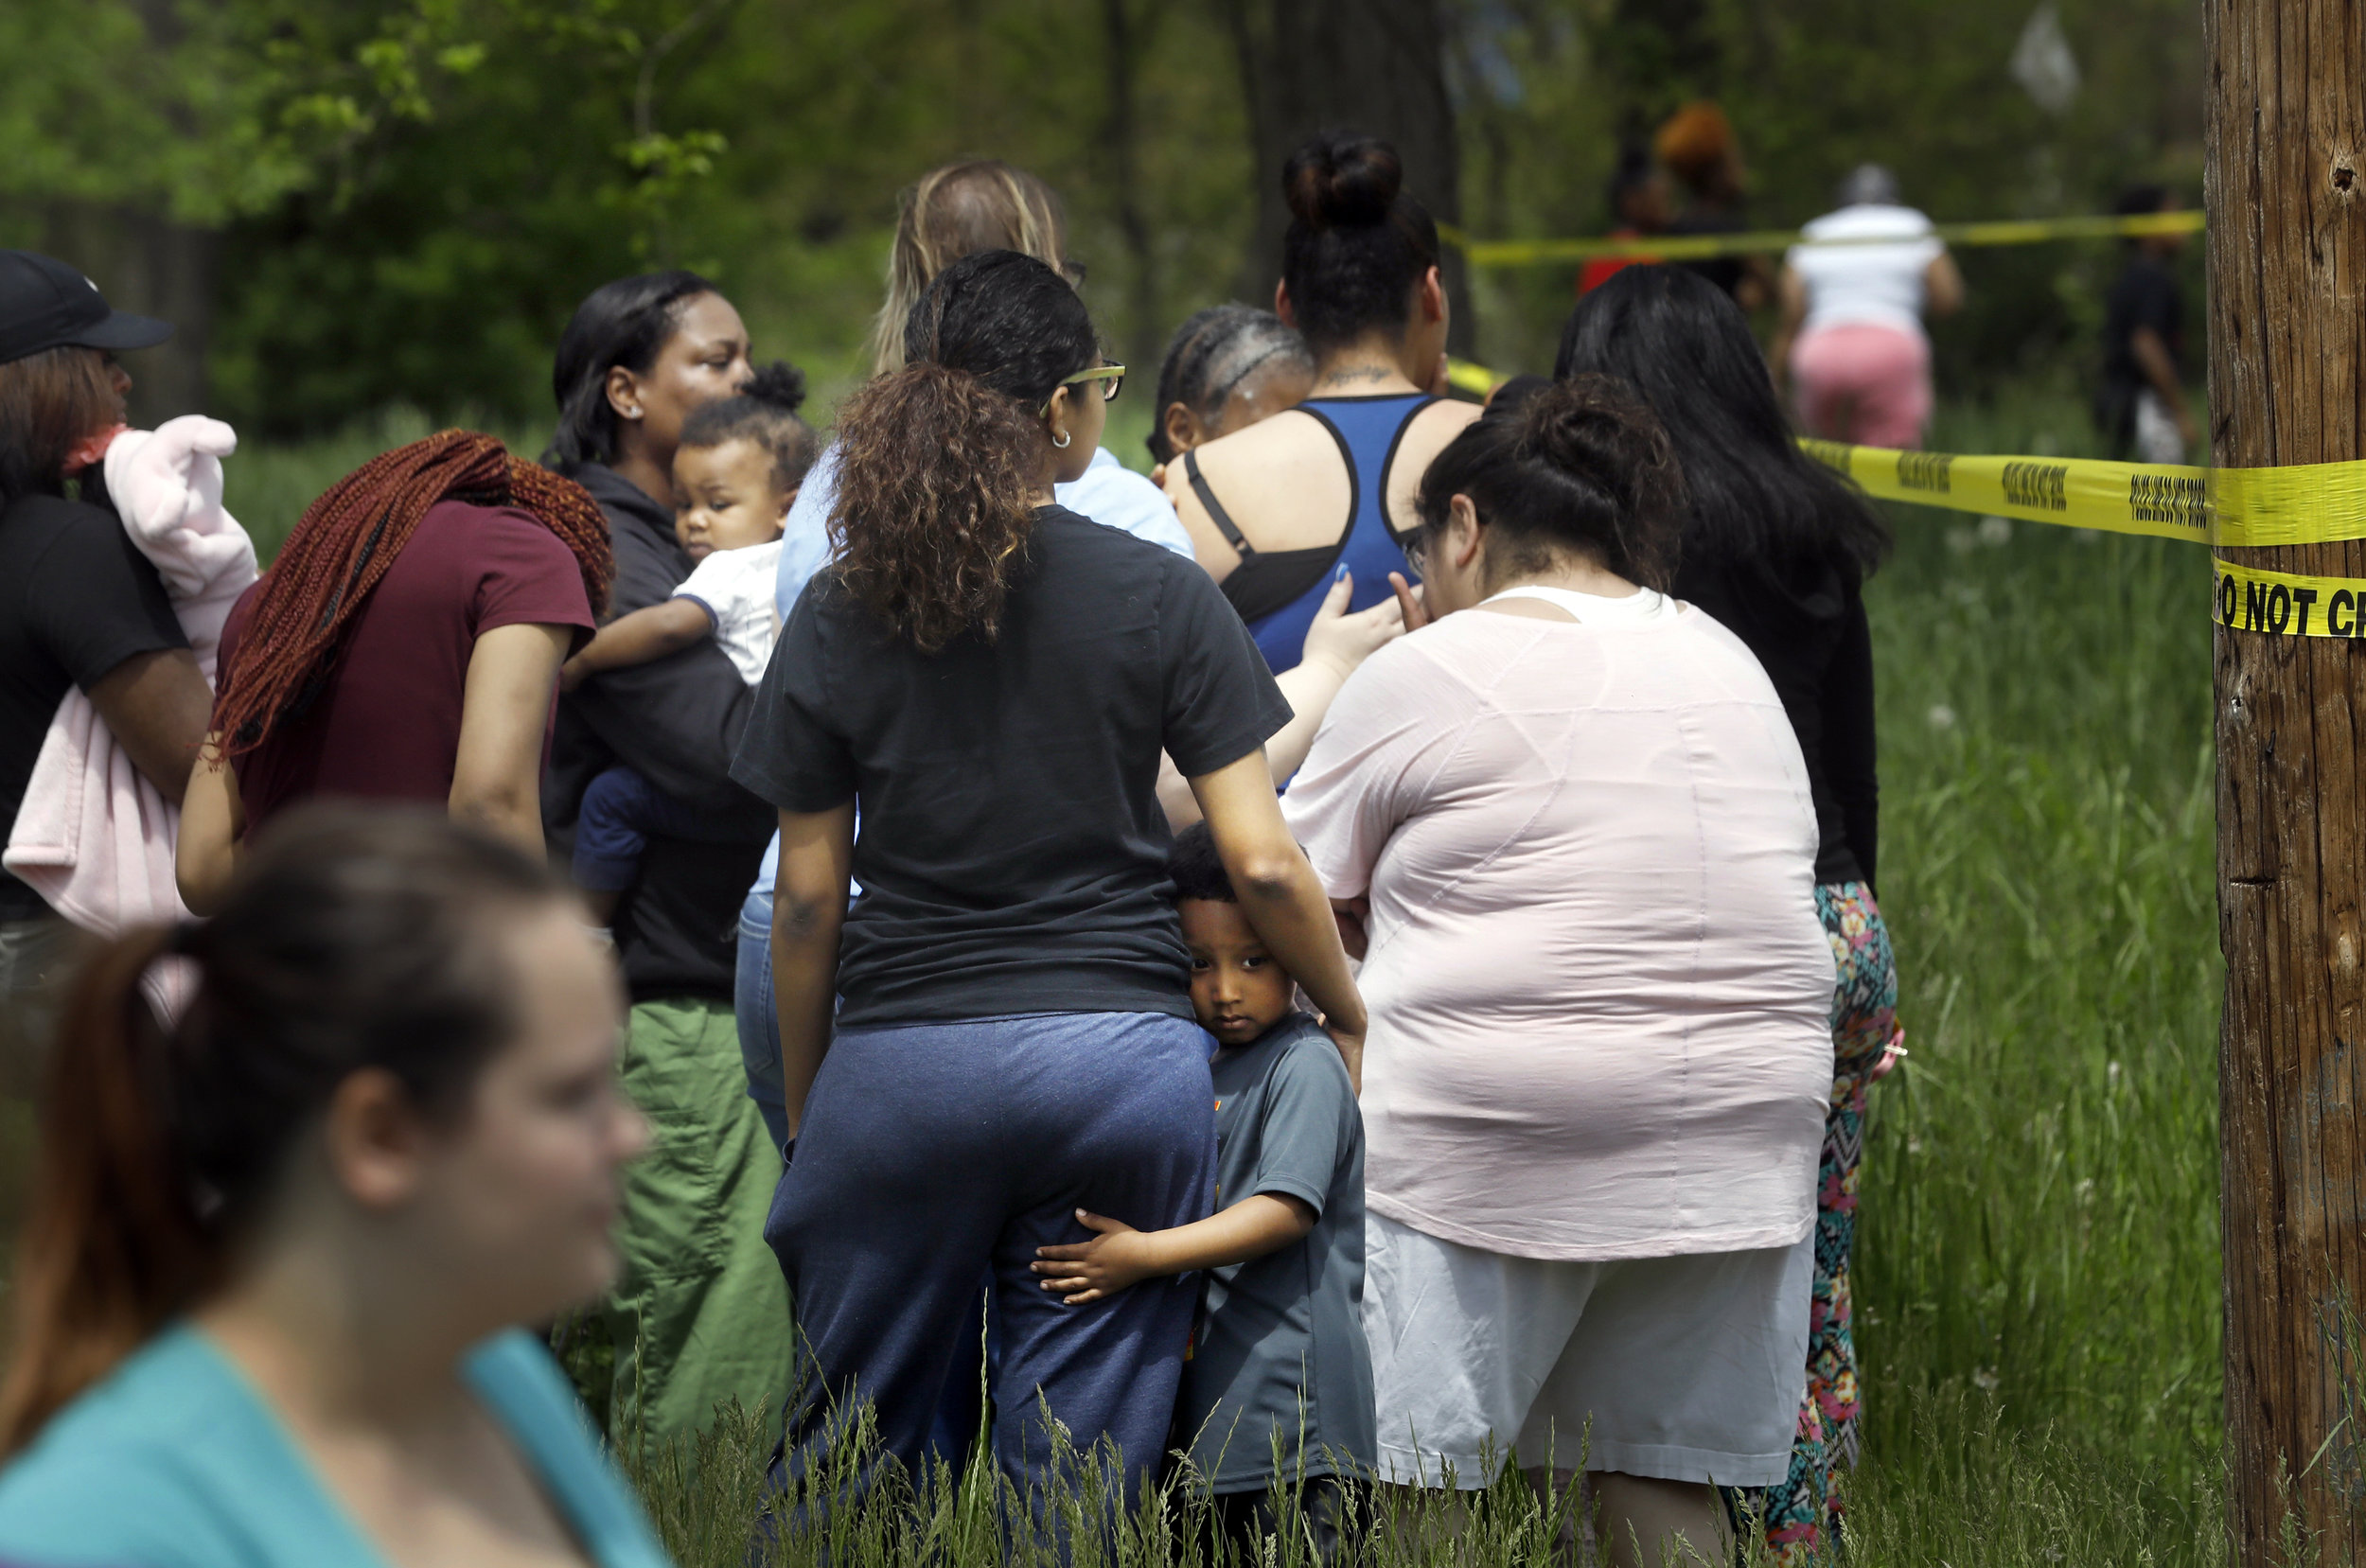  Torice Jackson, 3, clings to his mother Brooklyn Ruiz, as she talks with other mourners while Toledo Police investigate a shooting death that occurred in the early afternoon of May 17, 2018, on Highland Avenue near North Detroit Avenue in Toledo. Po